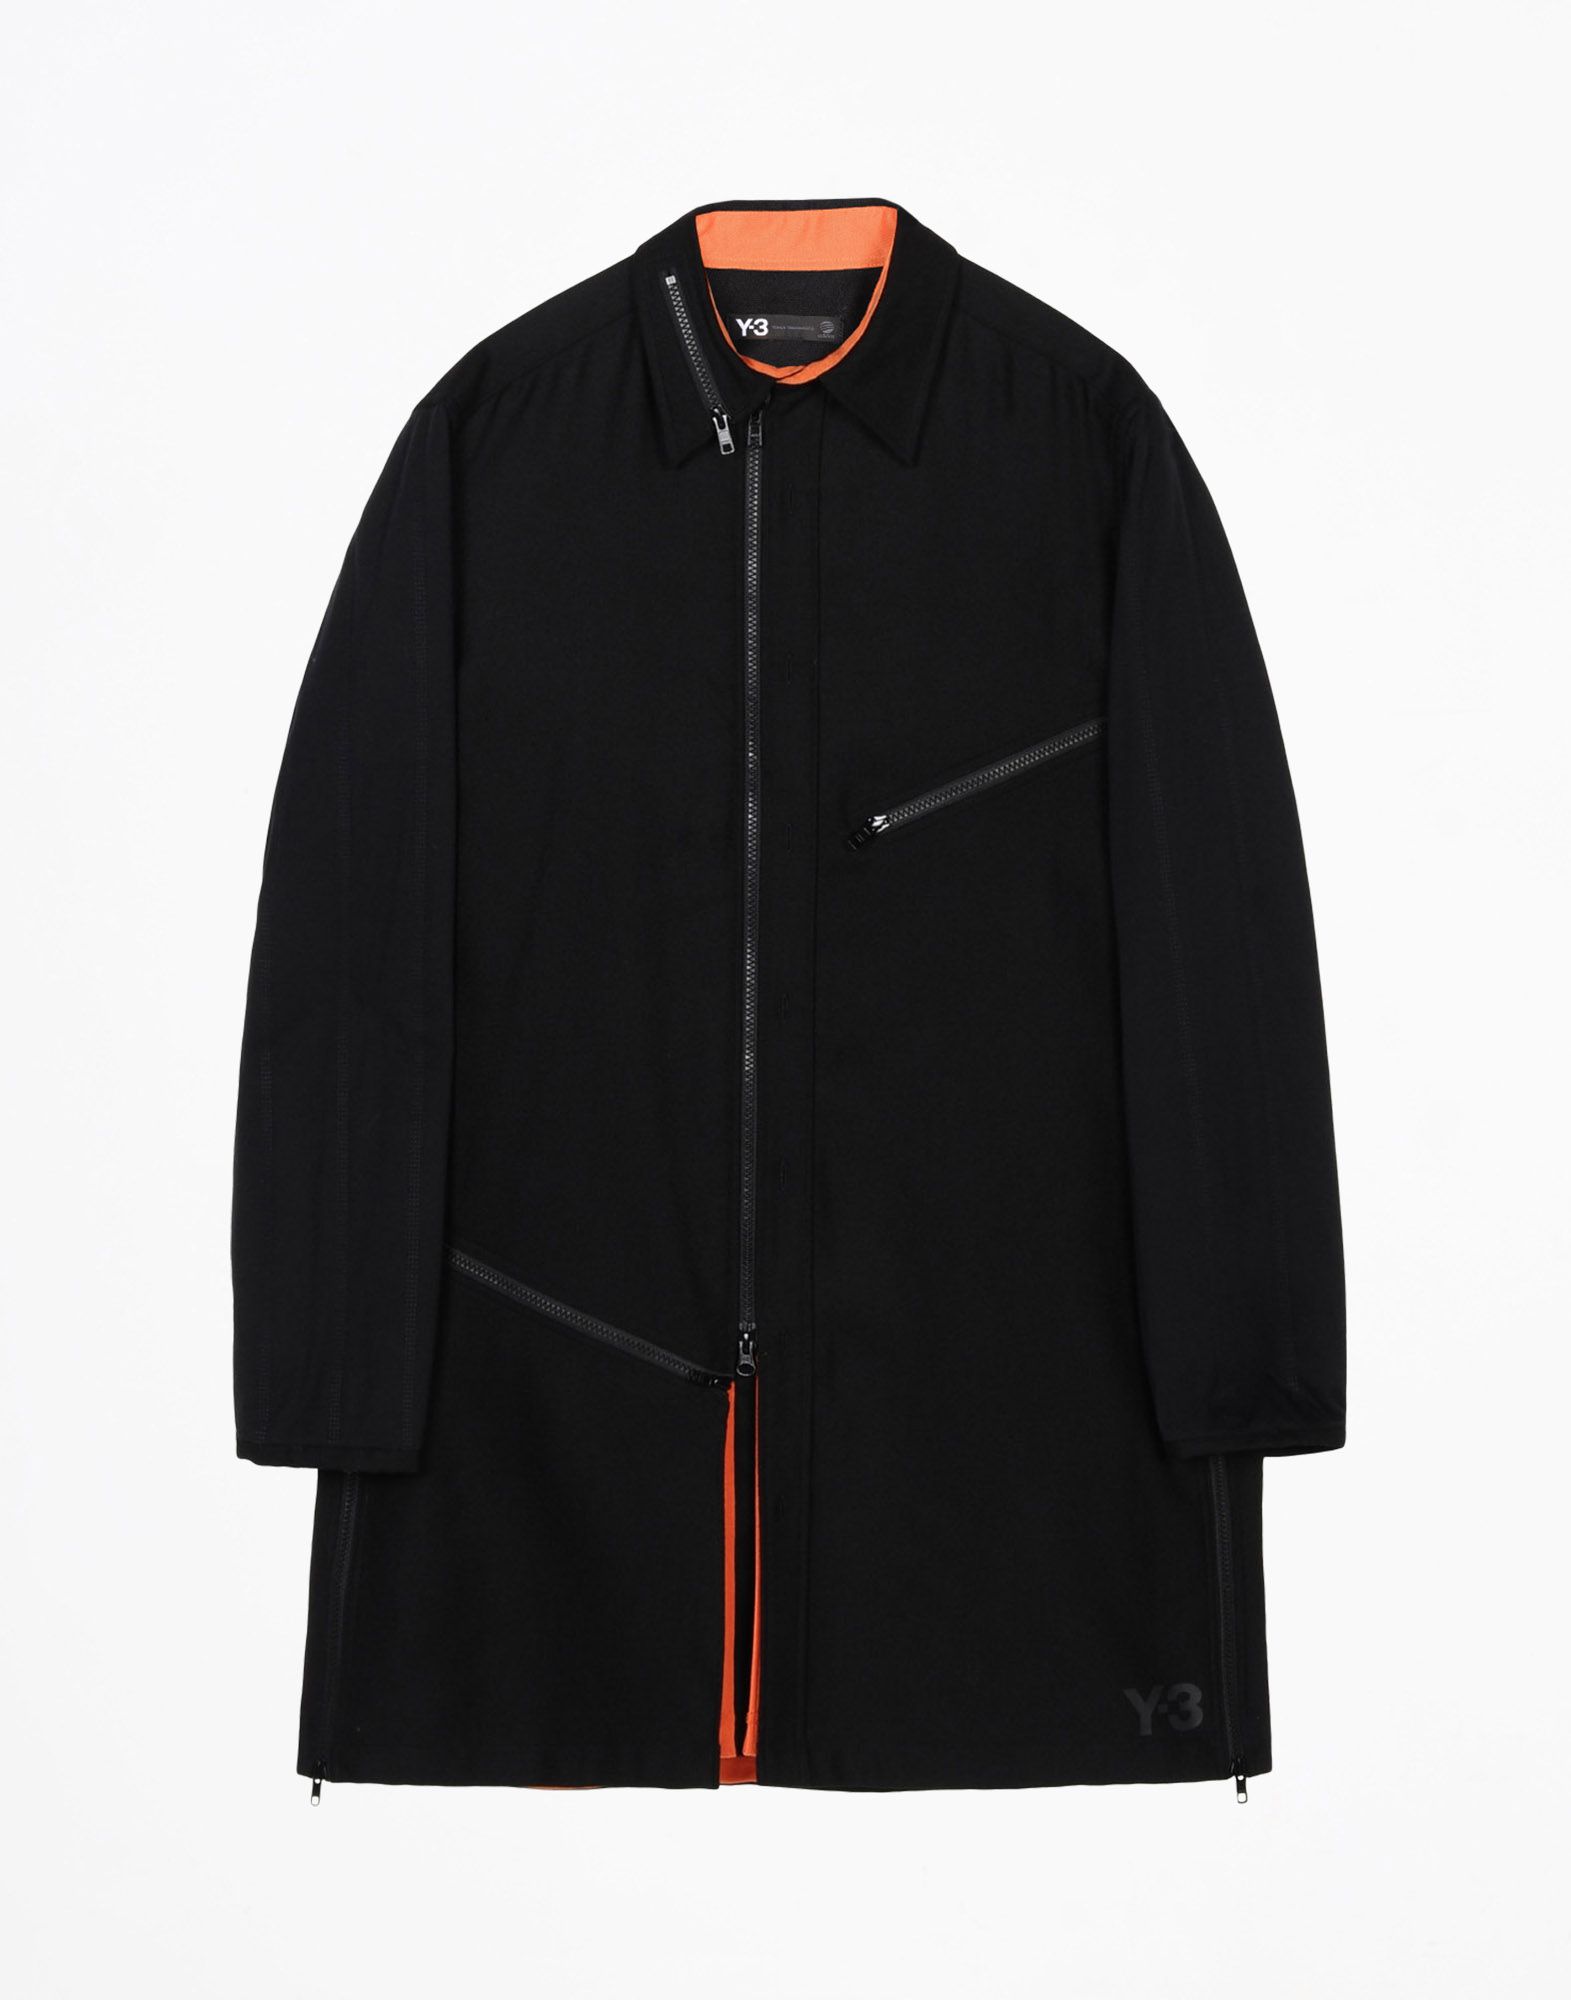 Y 3 LONG WOOL SHIRT for Men | Adidas Y-3 Official Store